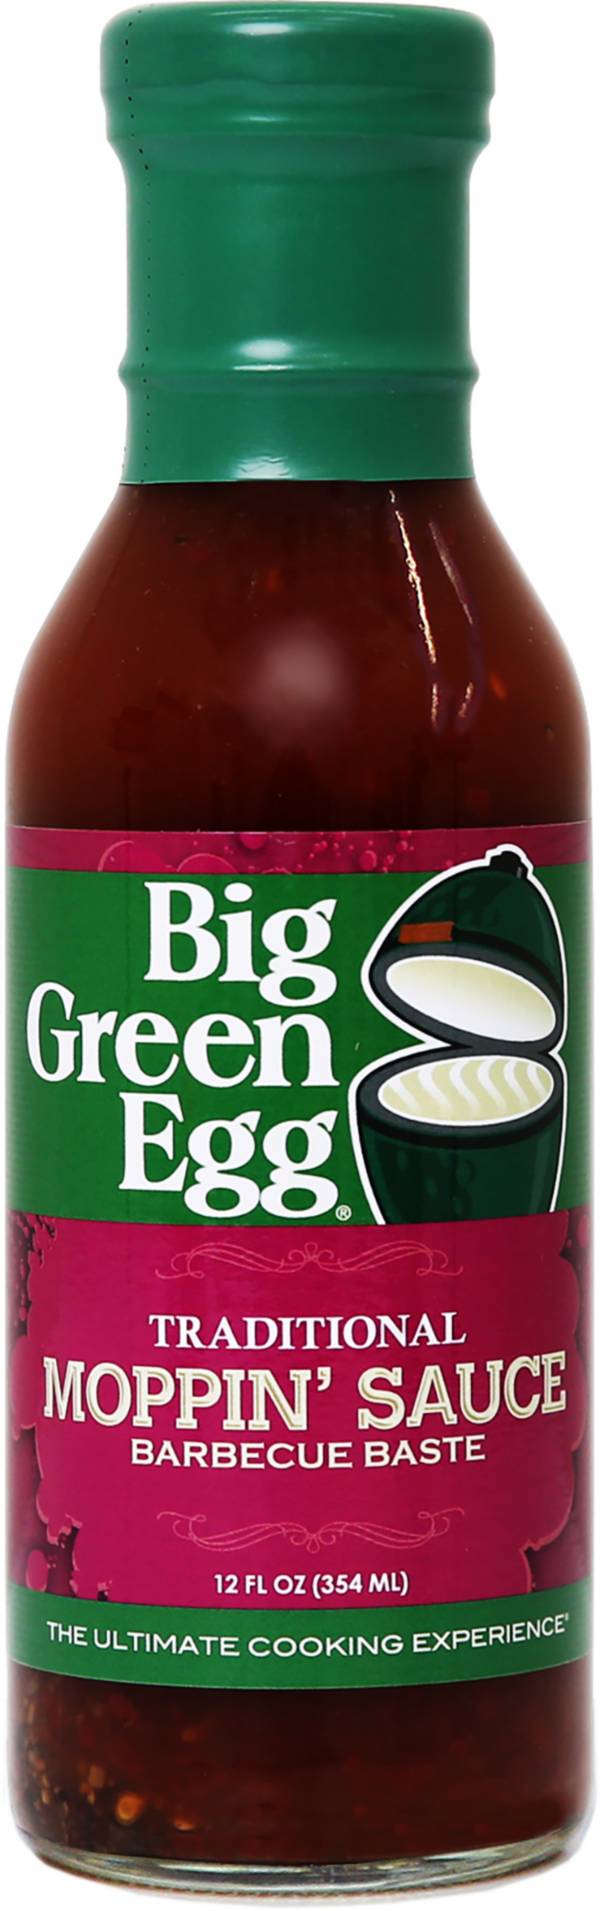 Big Green Egg Traditional Moppin' Sauce Barbecue Baste product image